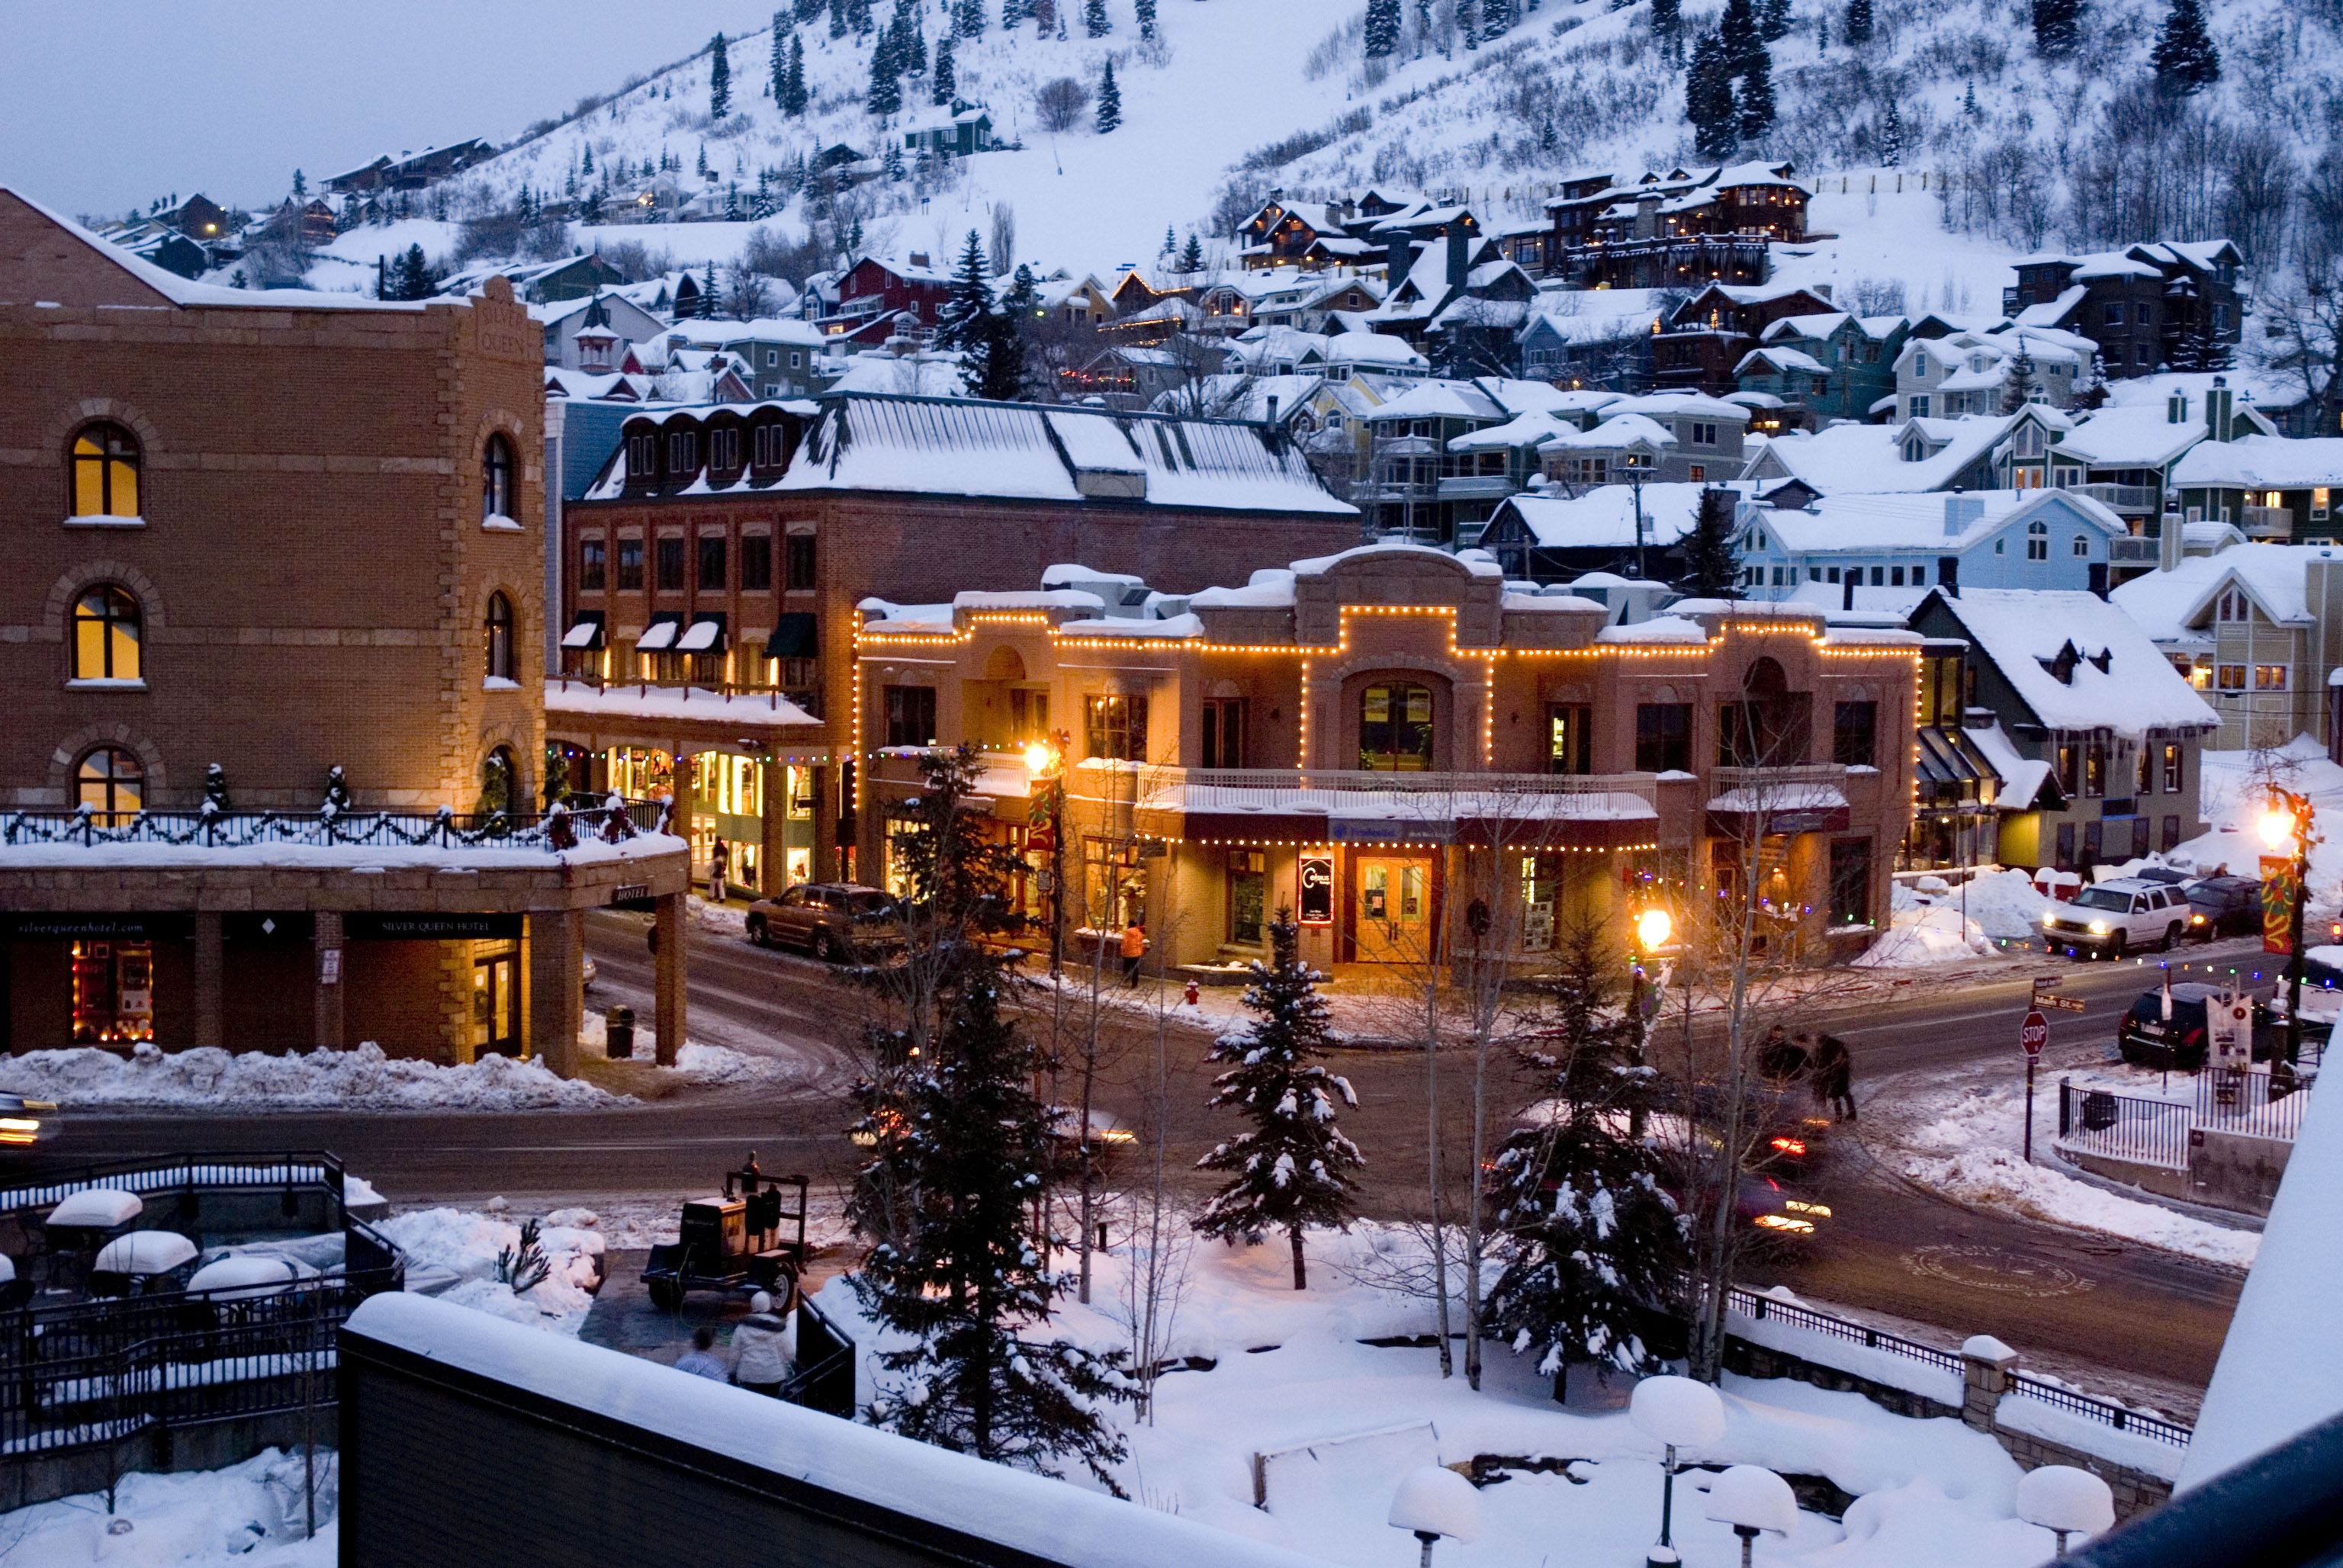 Looking for a Winter Escape? Park City, Utah is a Winter Wonderland for